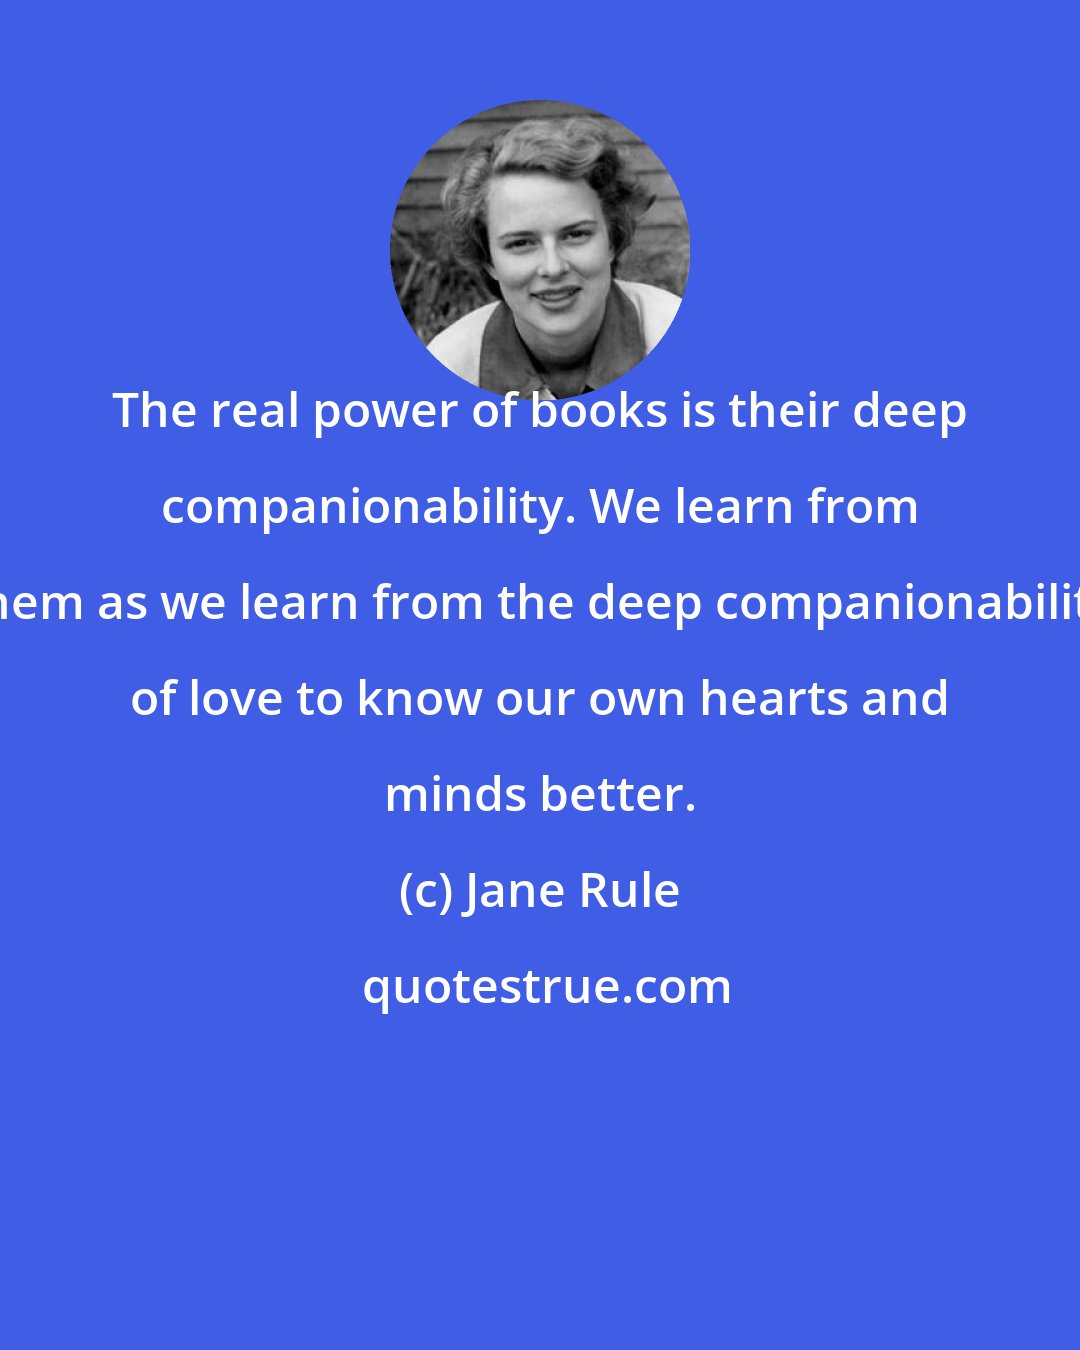 Jane Rule: The real power of books is their deep companionability. We learn from them as we learn from the deep companionability of love to know our own hearts and minds better.